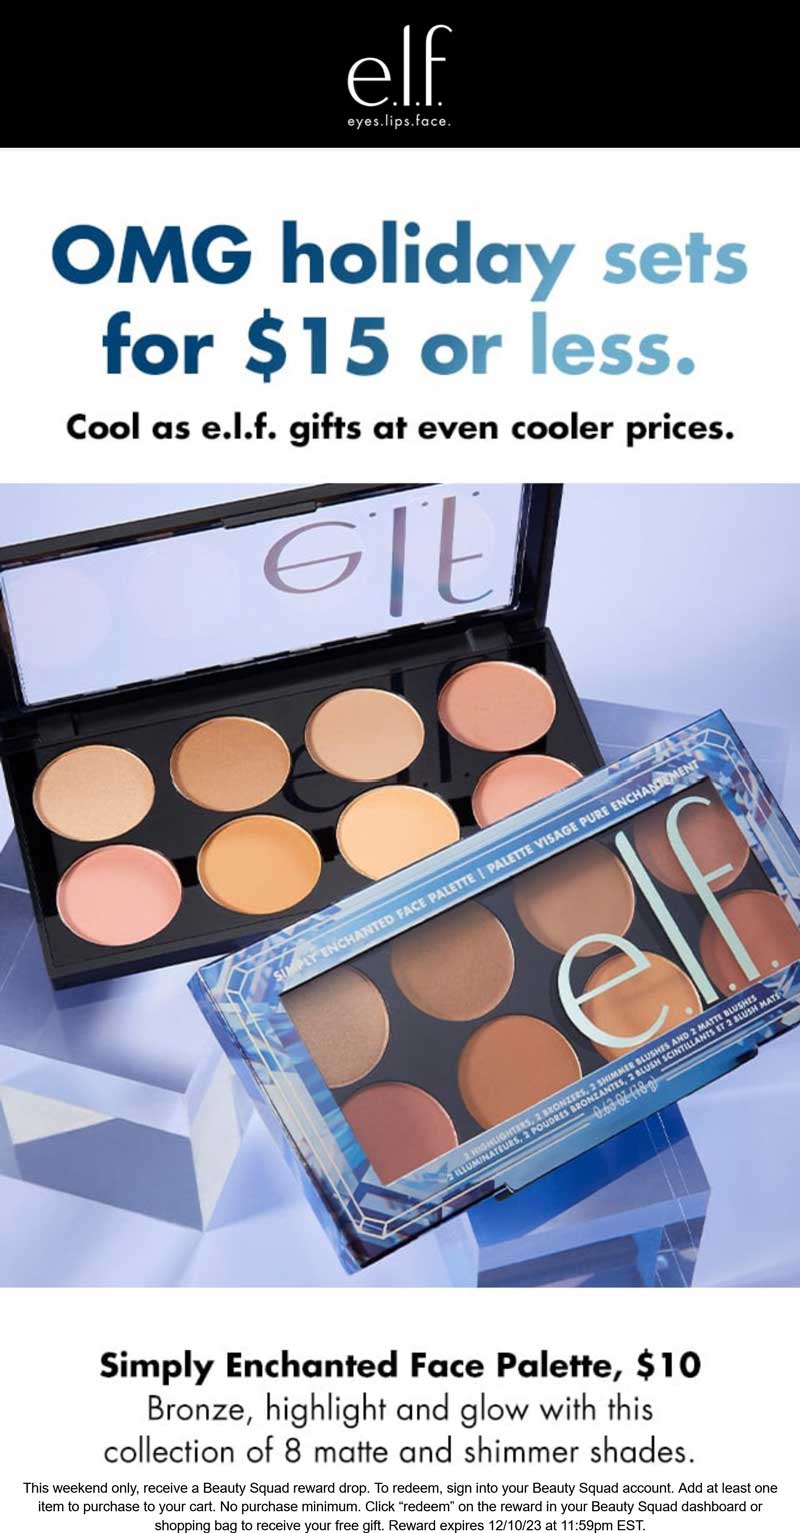 e.l.f. Cosmetics stores Coupon  Holiday sets = $15 or less today at e.l.f. Cosmetics #elfcosmetics 